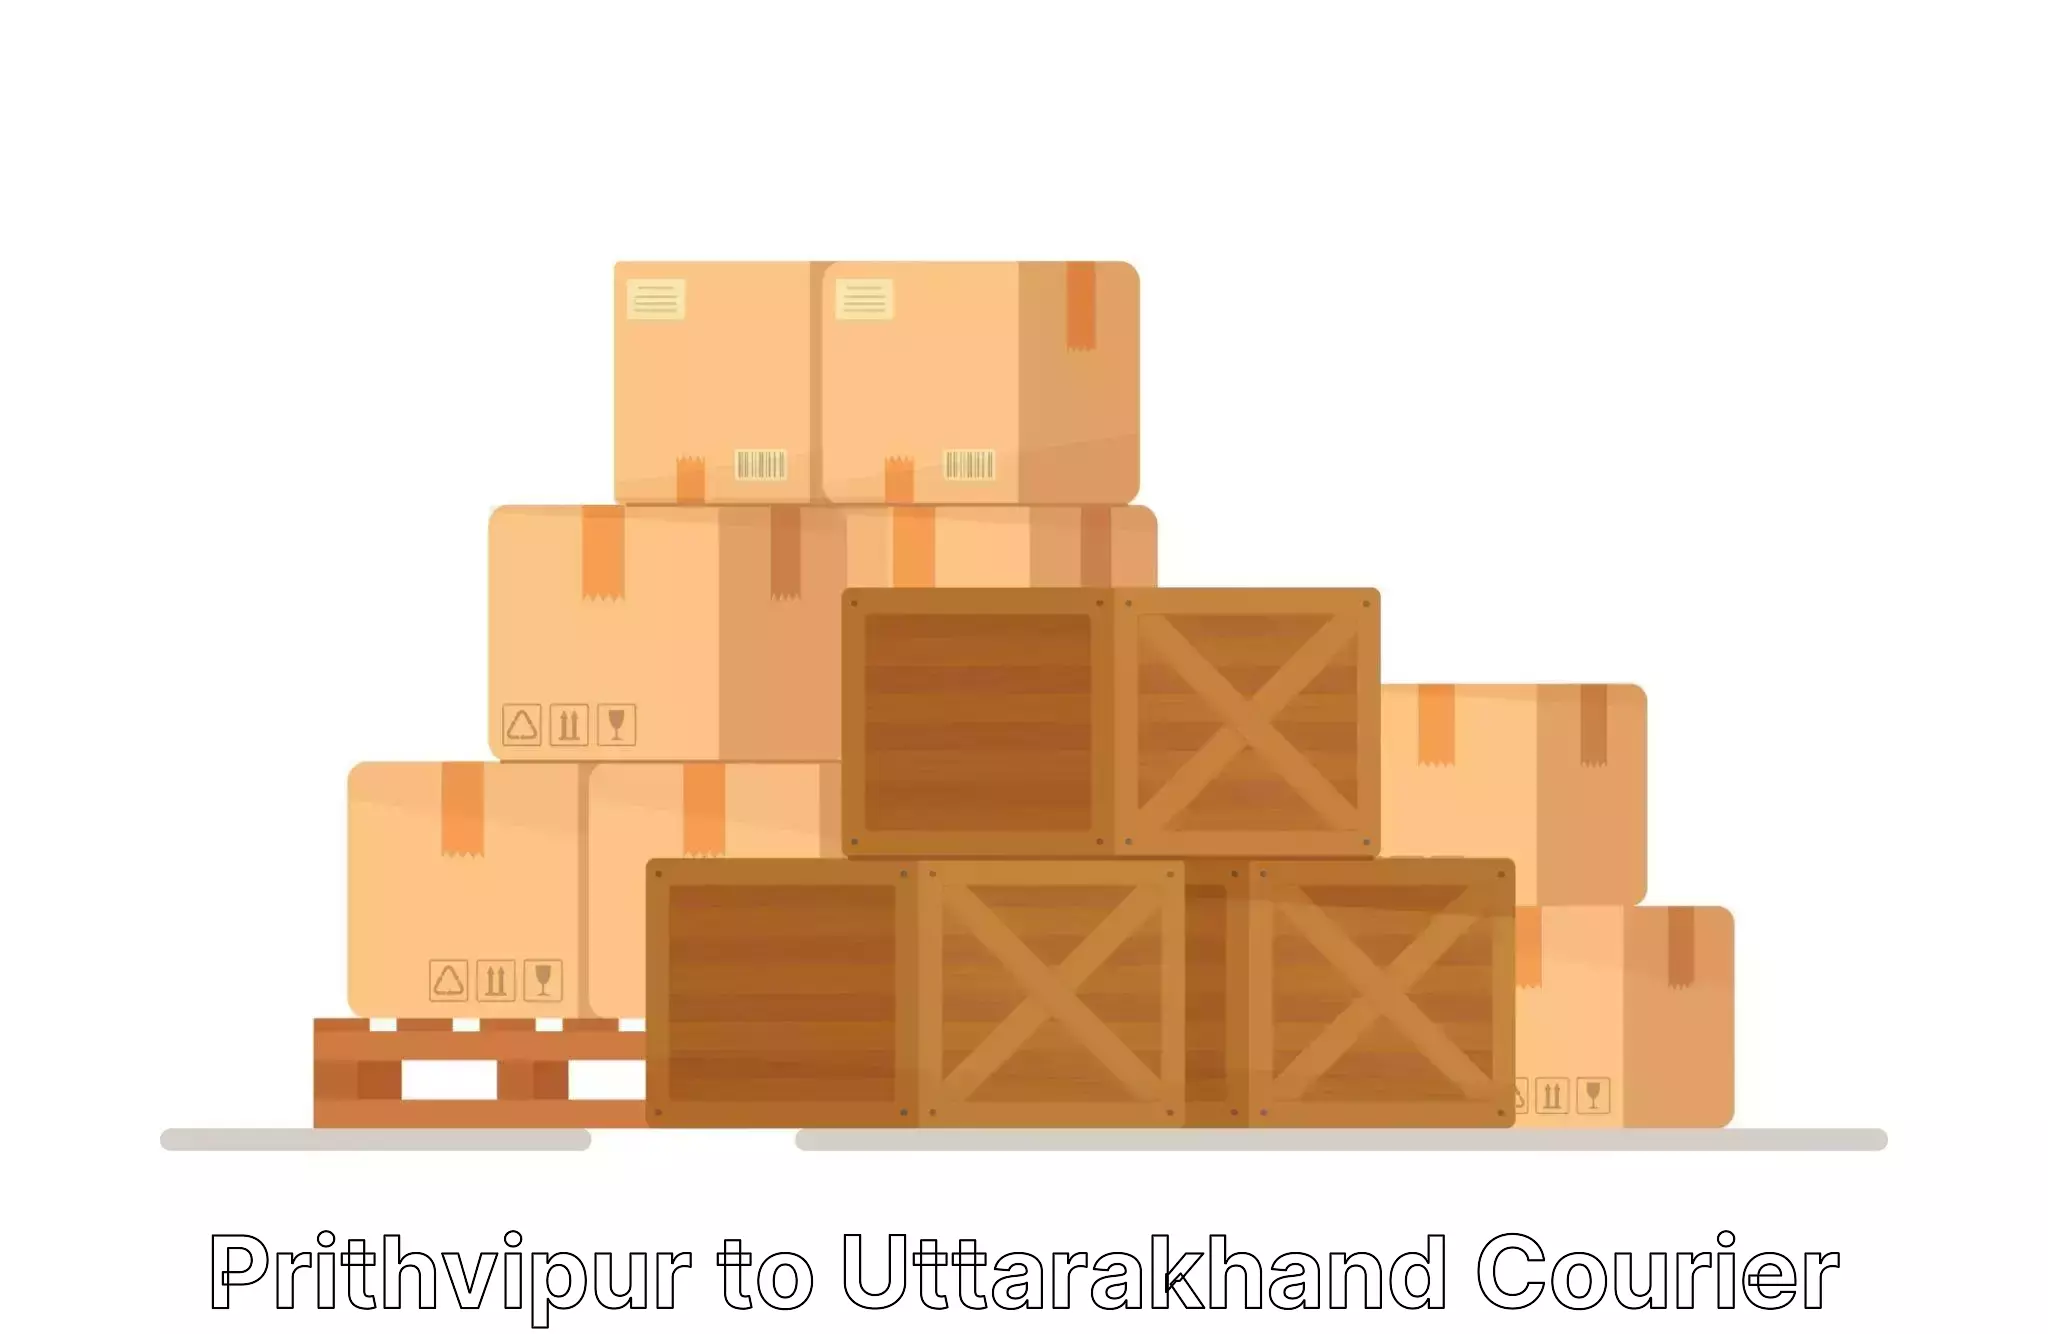 Furniture relocation experts Prithvipur to Bhagwanpur